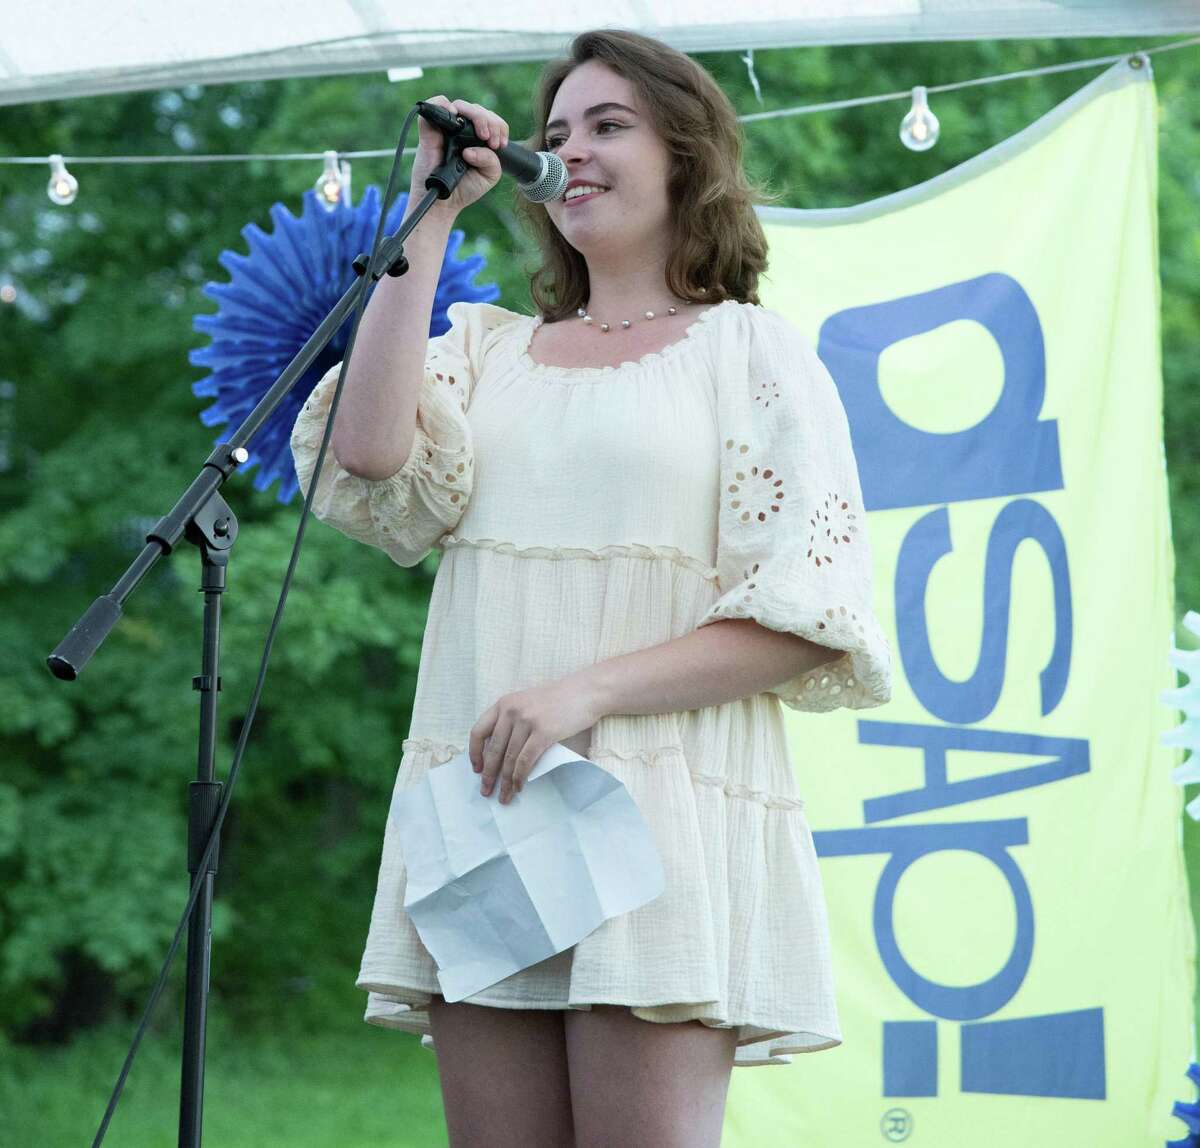 ASAP! held a Celebration of Community fundraiser on June 4. Pictured is Eva Millay Evans, who read her poetry at the celebration.